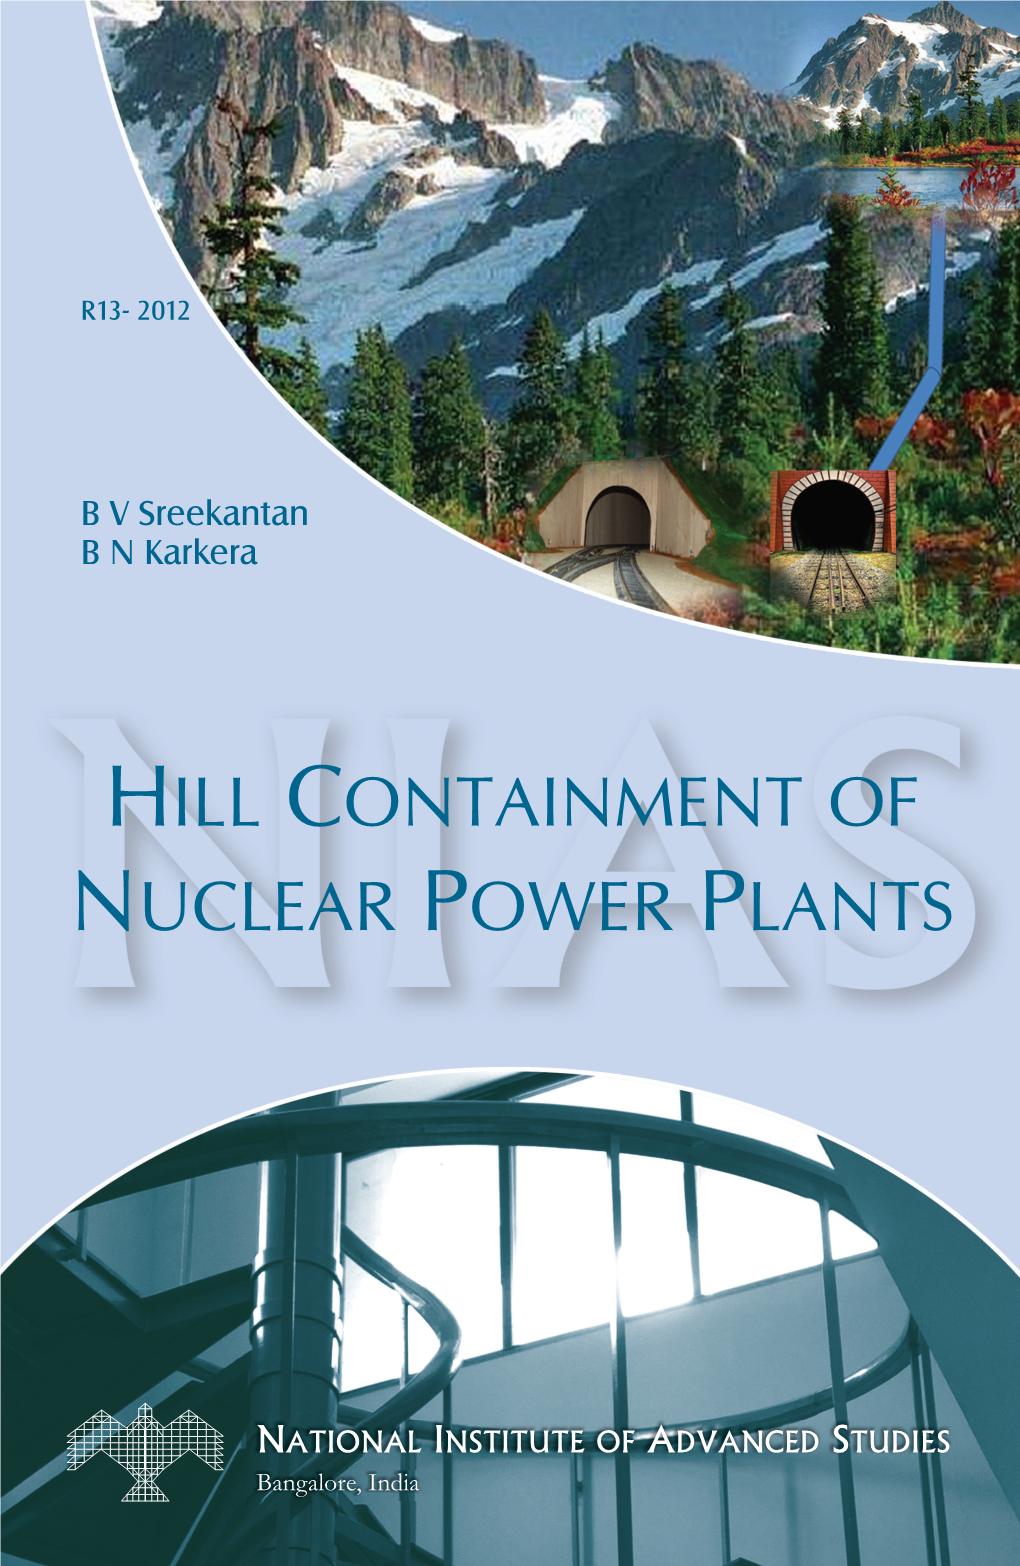 Hill Containment of Nuclear Power Plants